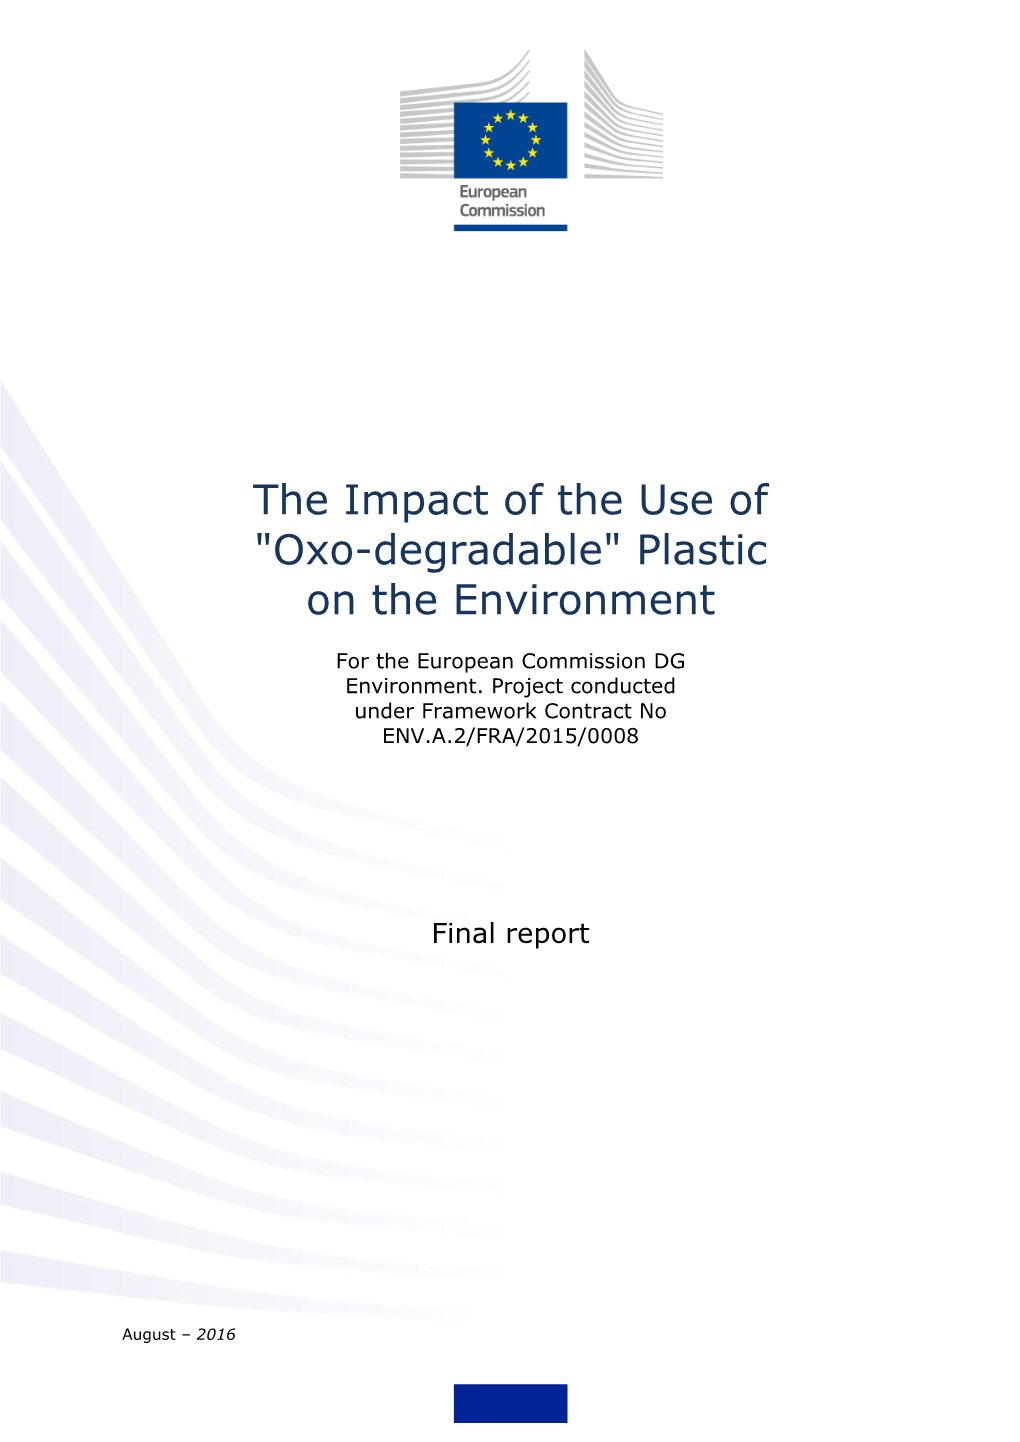 "Oxo-Degradable" Plastic on the Environment